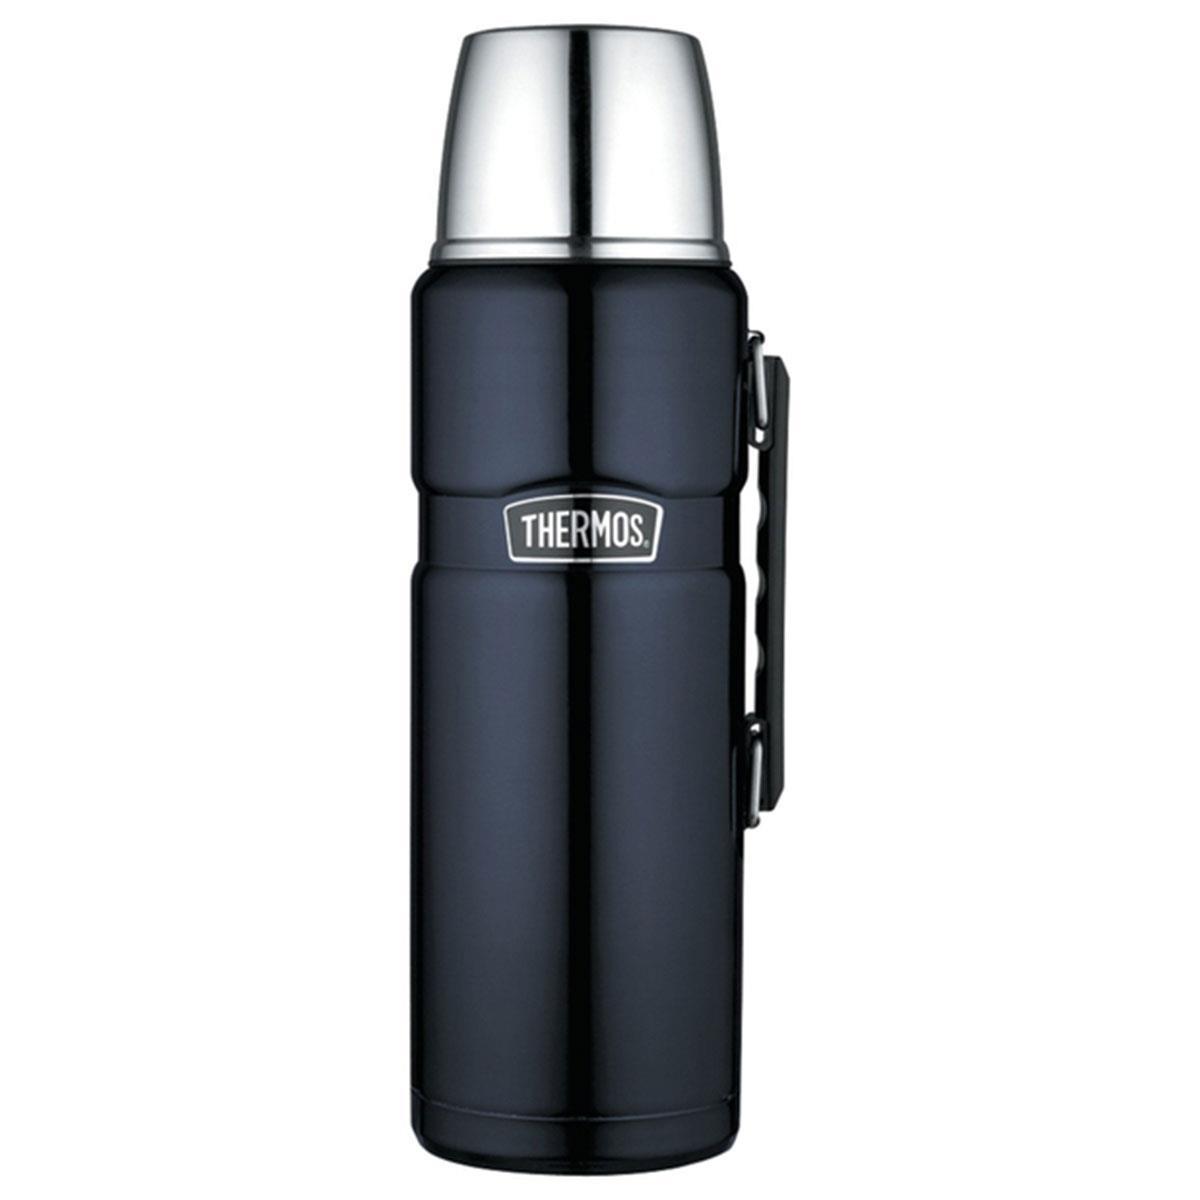 Thermos SK 2020 Stainles King X Large 2 Lt Termos